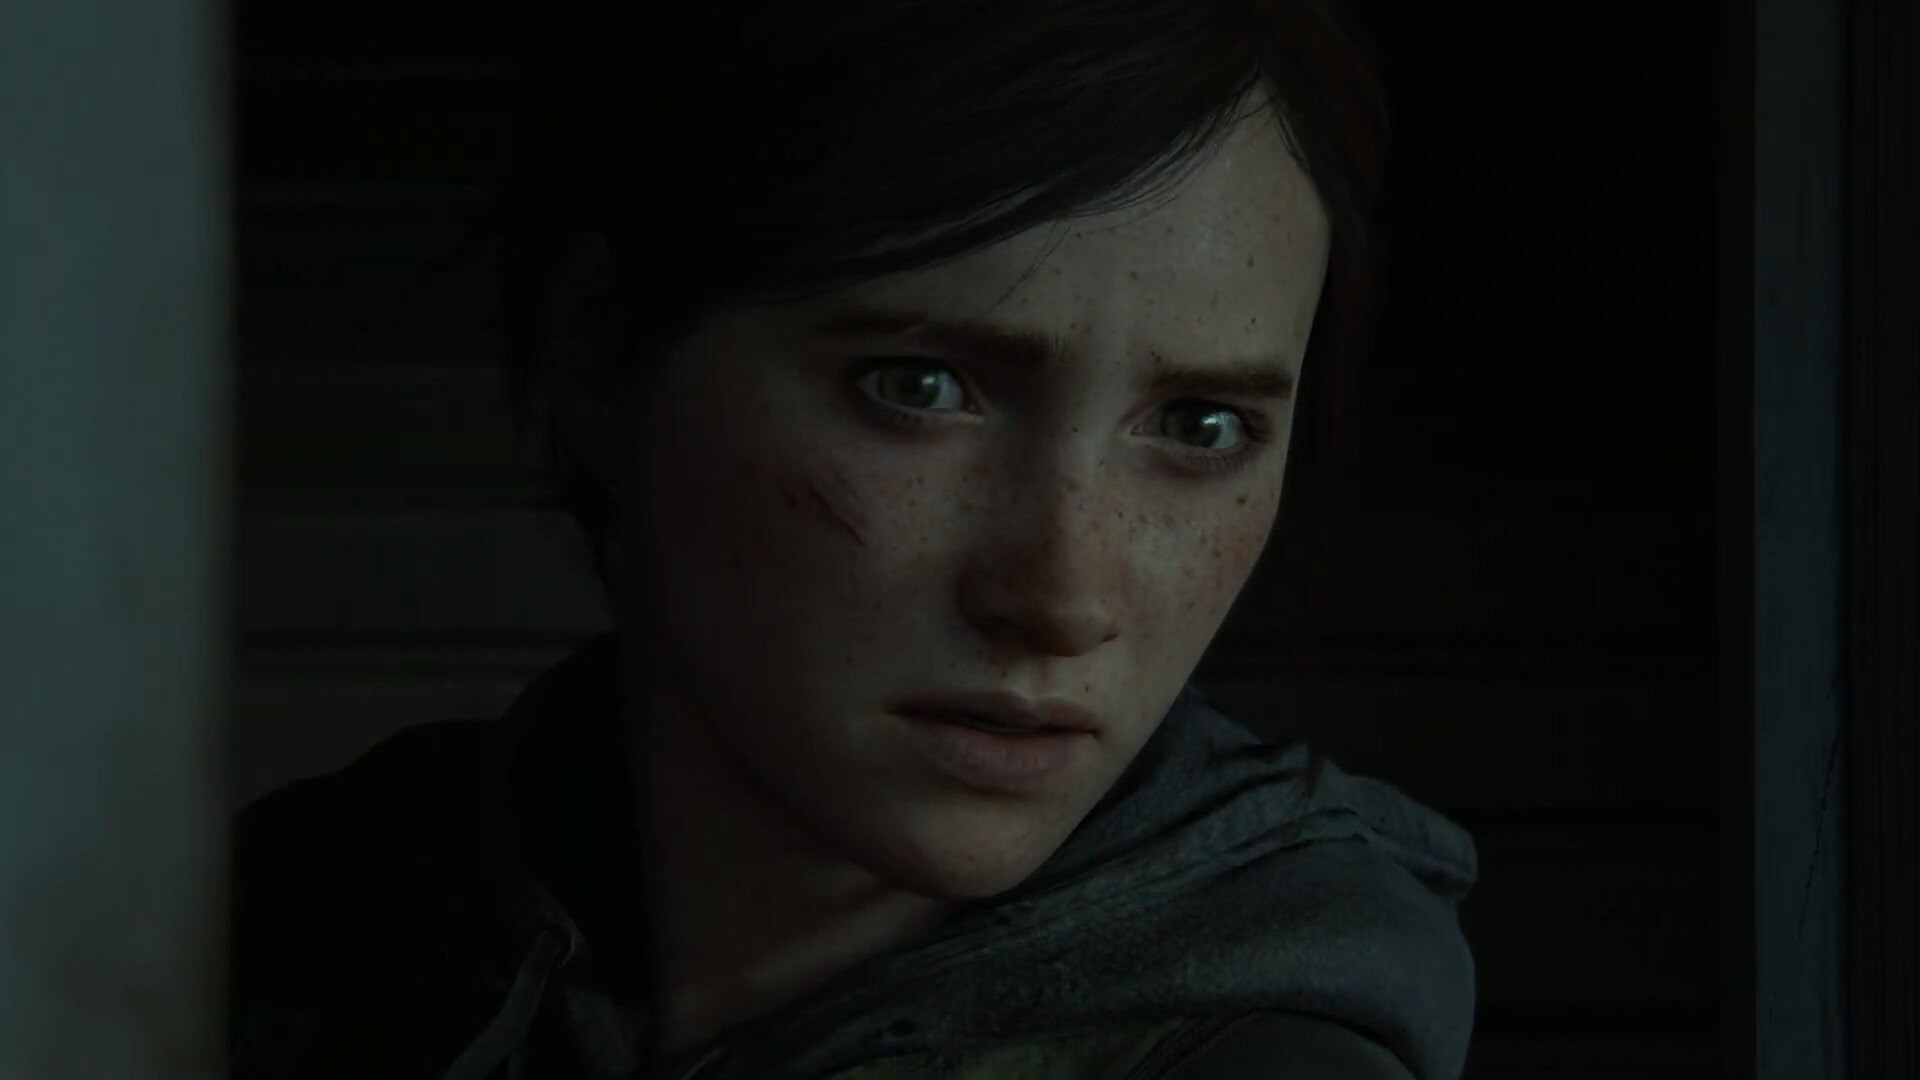 The Last of Us: Reviewers praised the design and layouts of the locations, The game's visual features, both artistic and graphic, were also well received, Ellie. 1920x1080 Full HD Wallpaper.